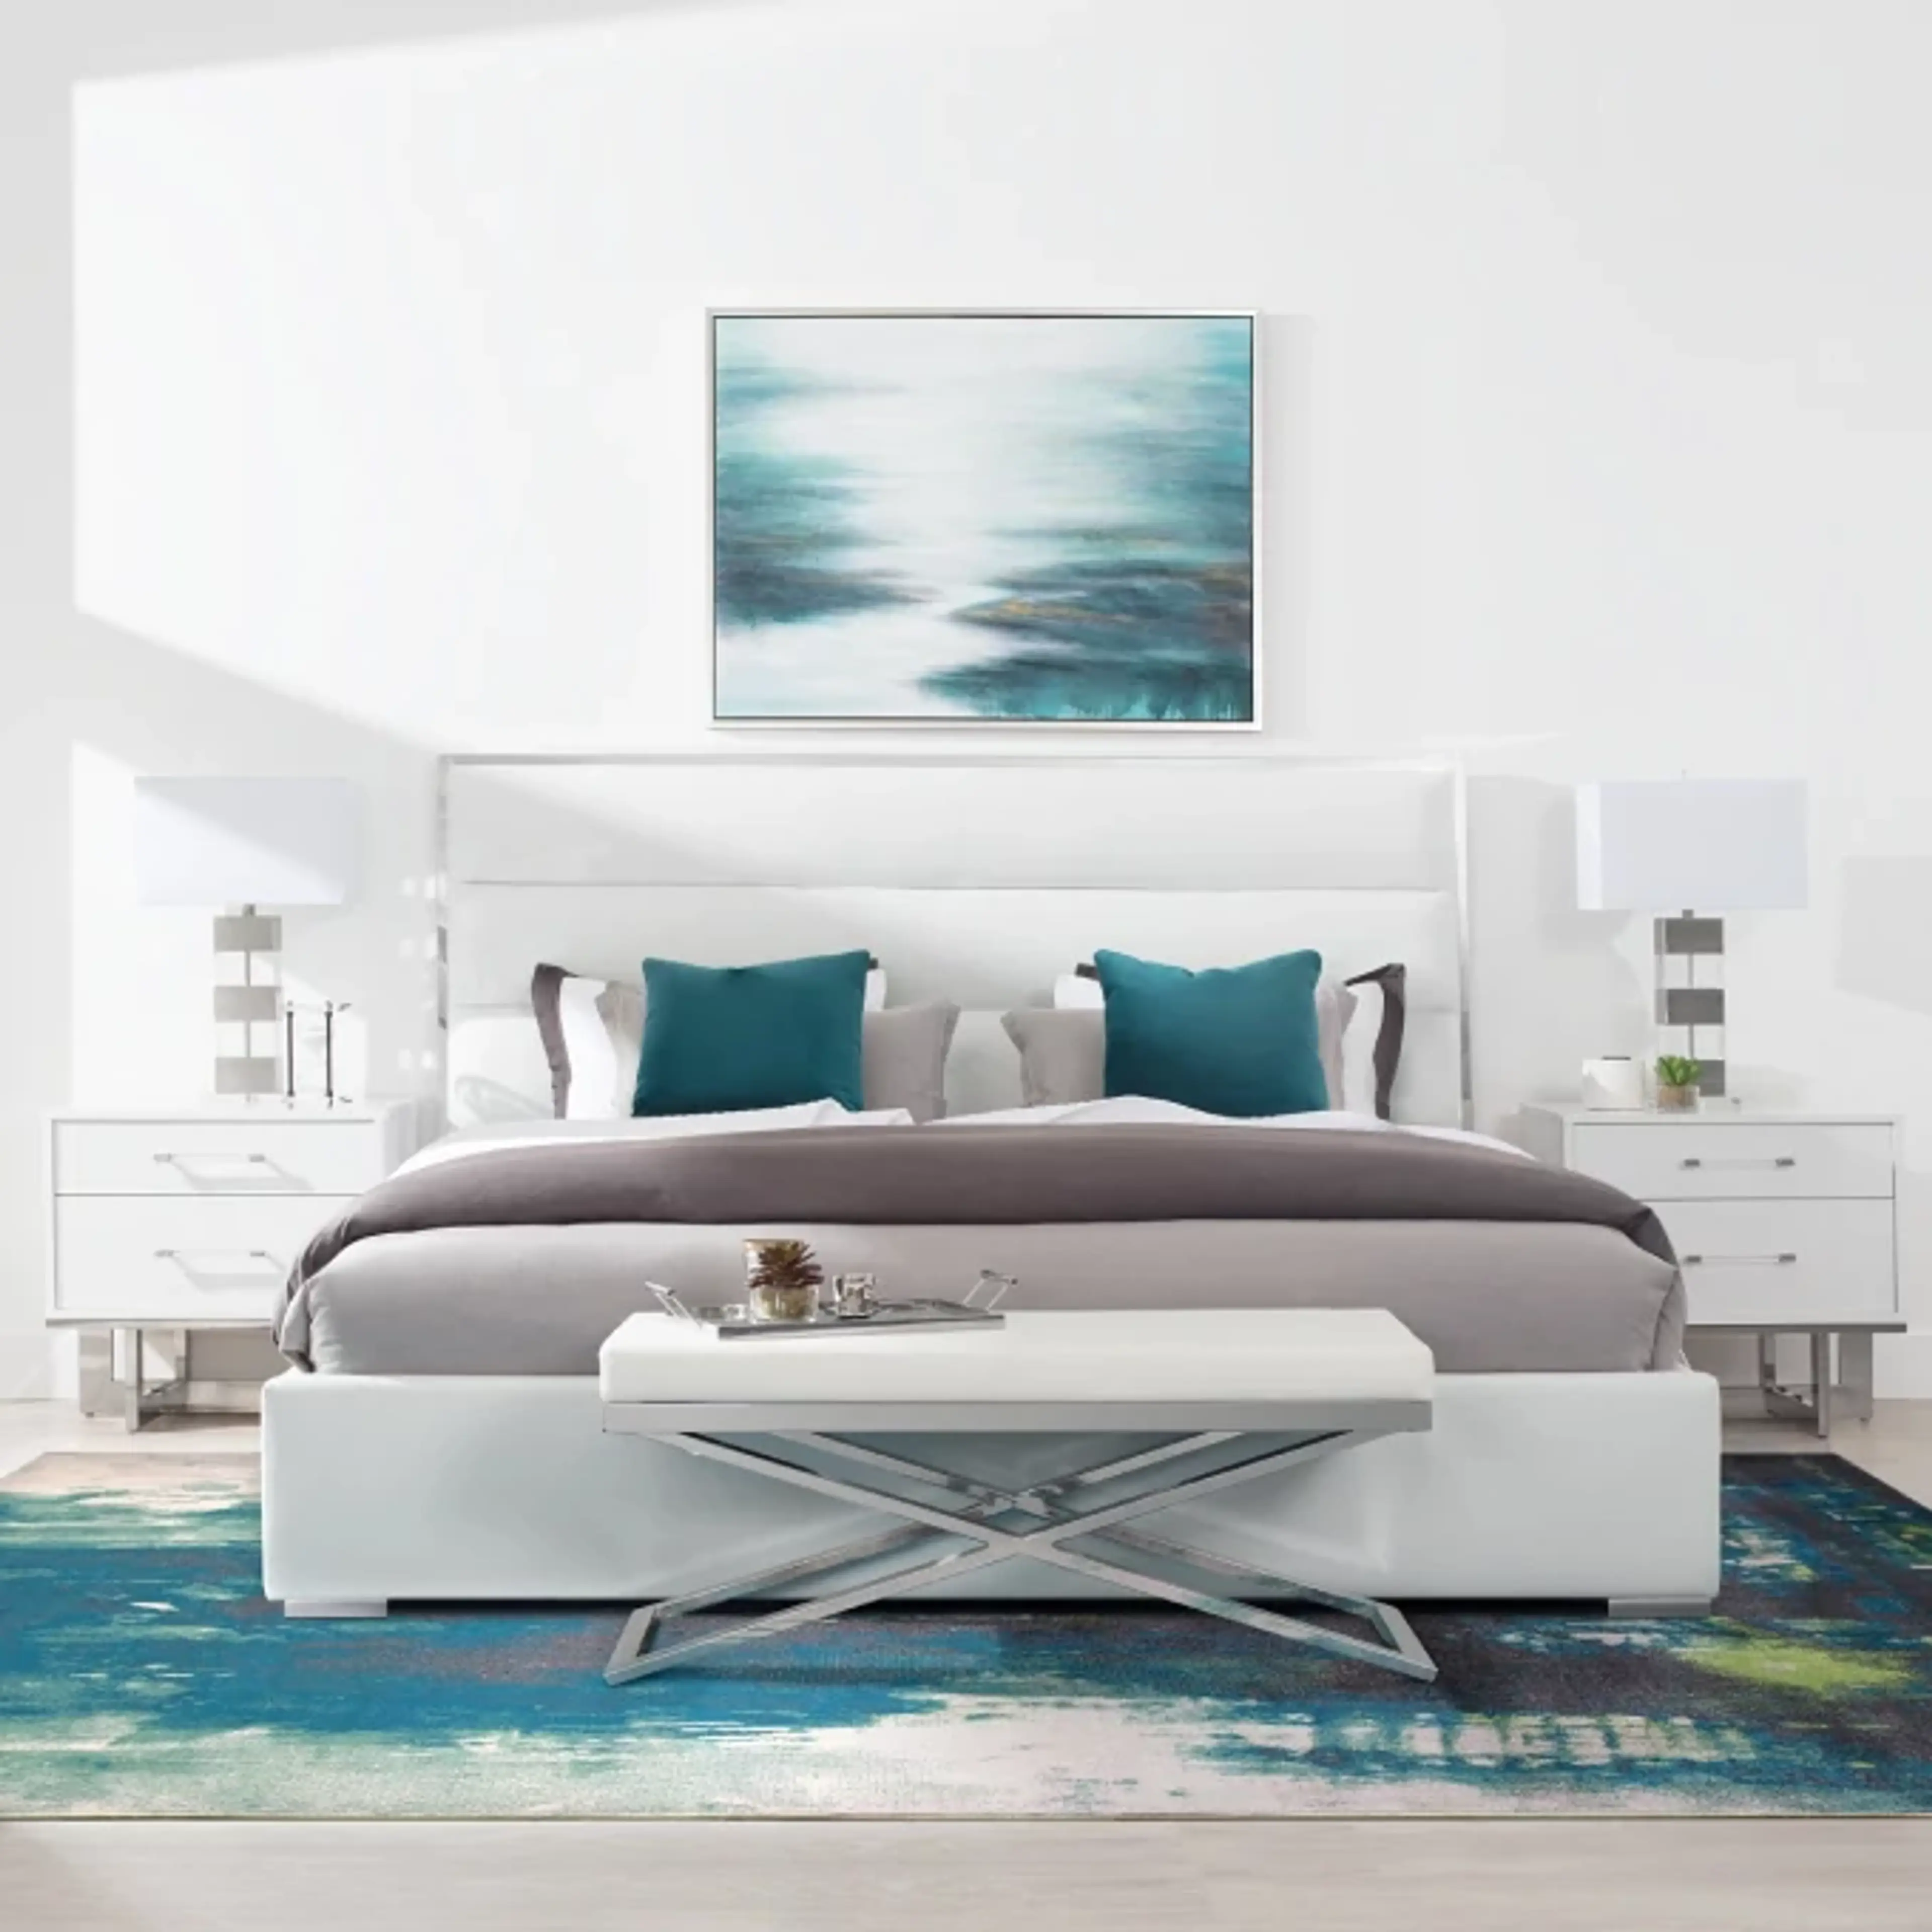 The Cortina Bedroom Collection: A Modern Marvel